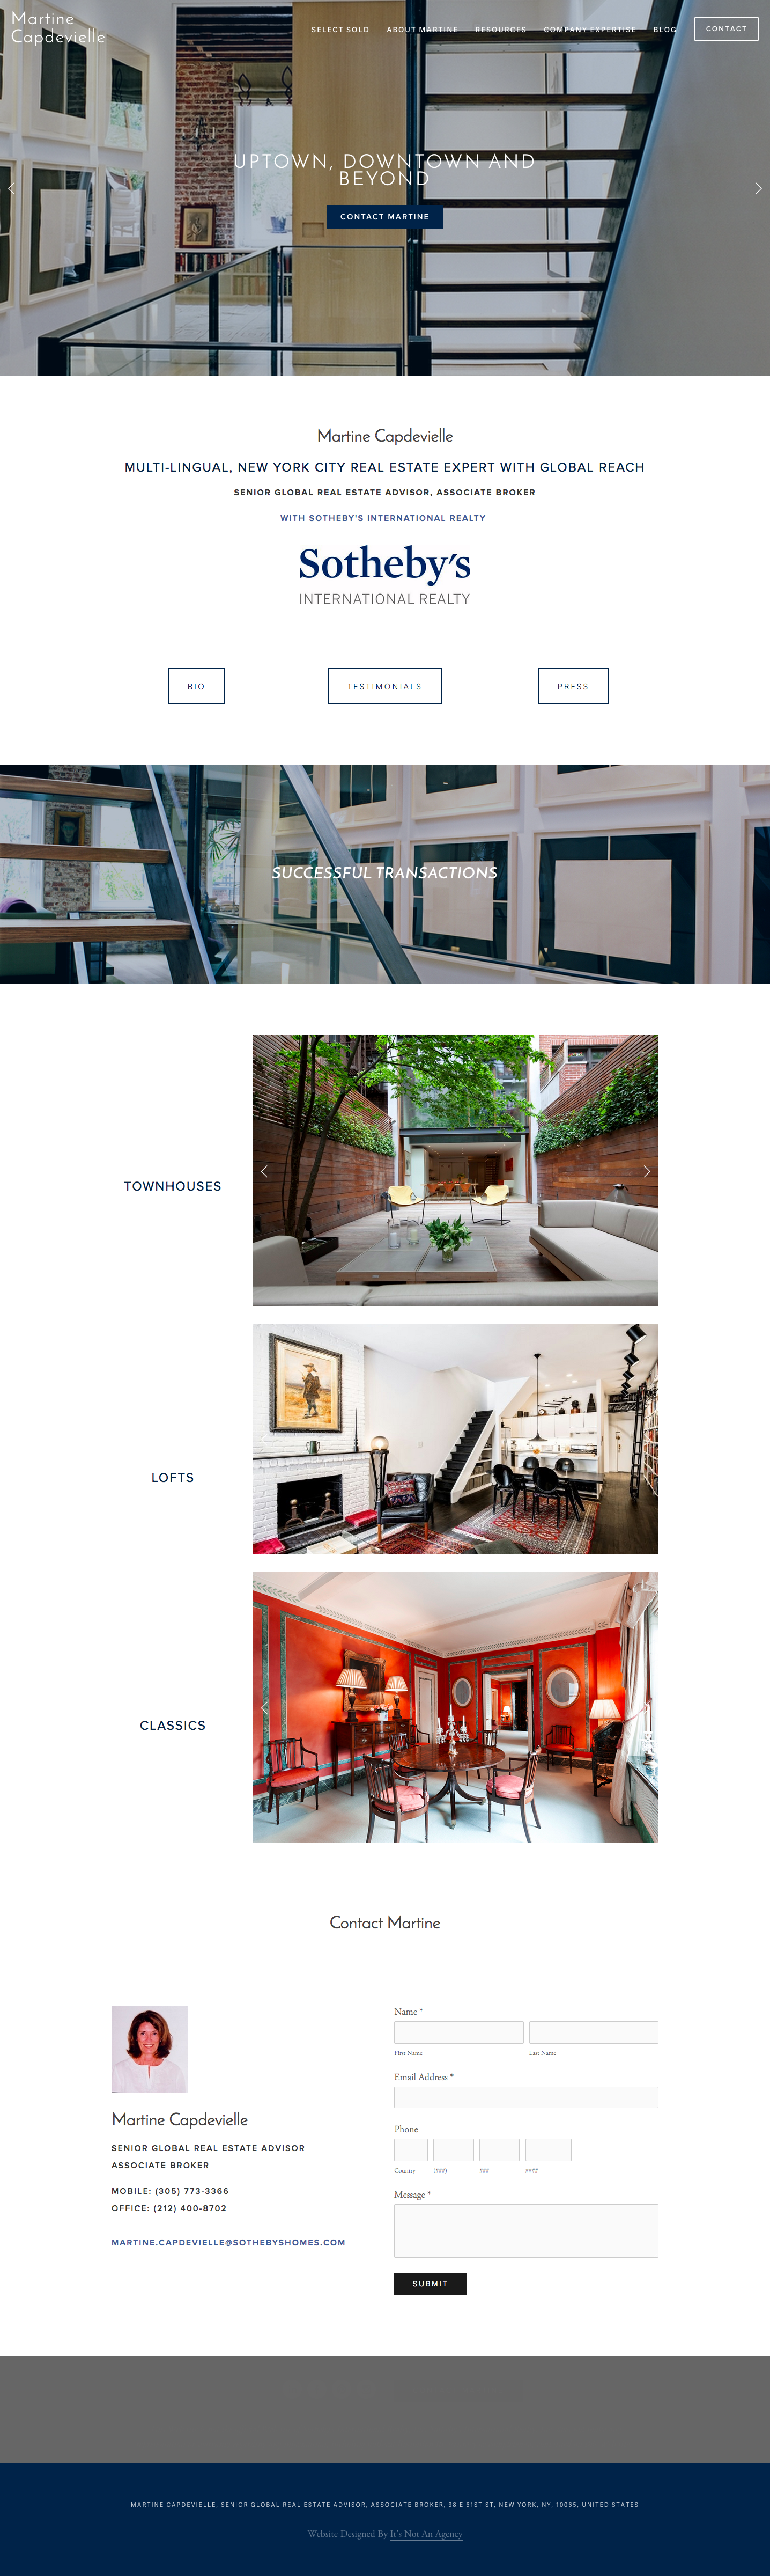 Real Estate Website_Martine Capdevielle1.png